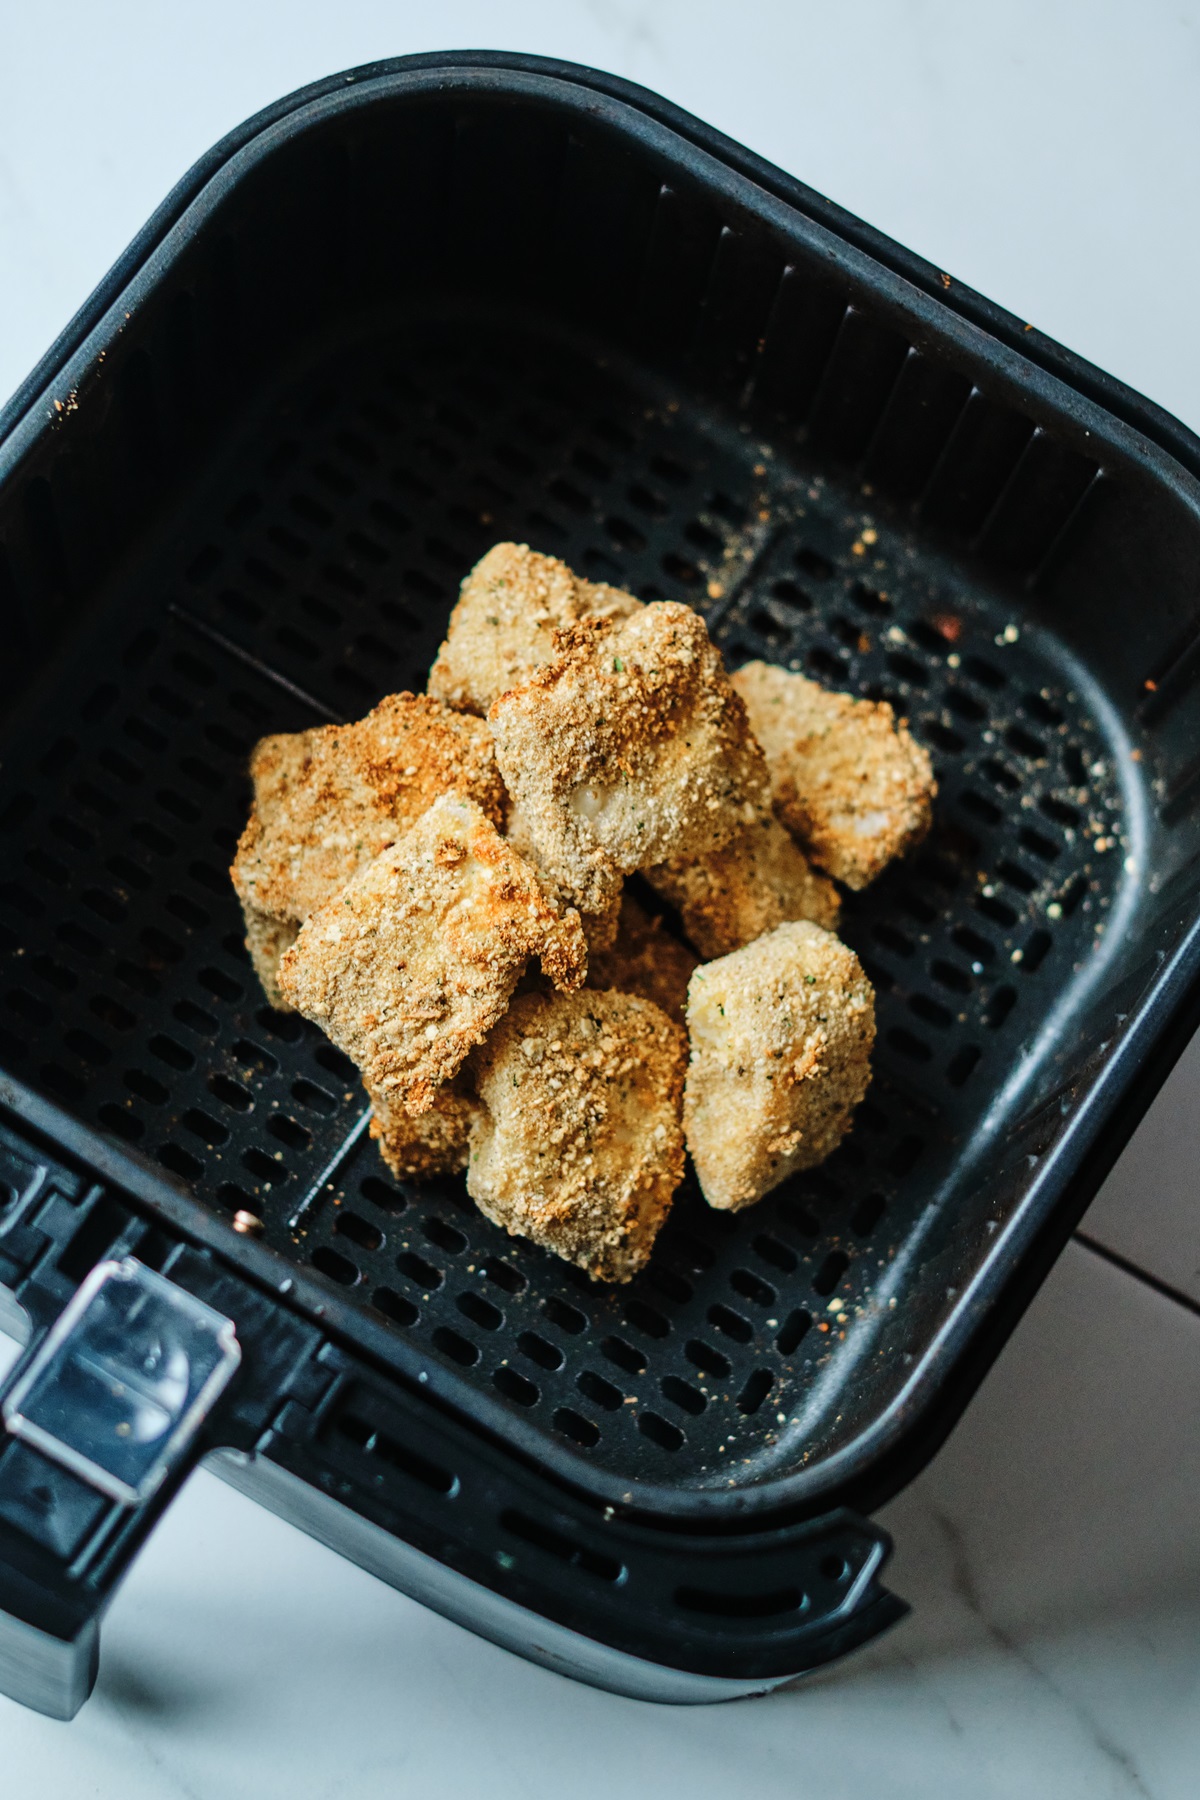 Cooked fish in air fryer basket.